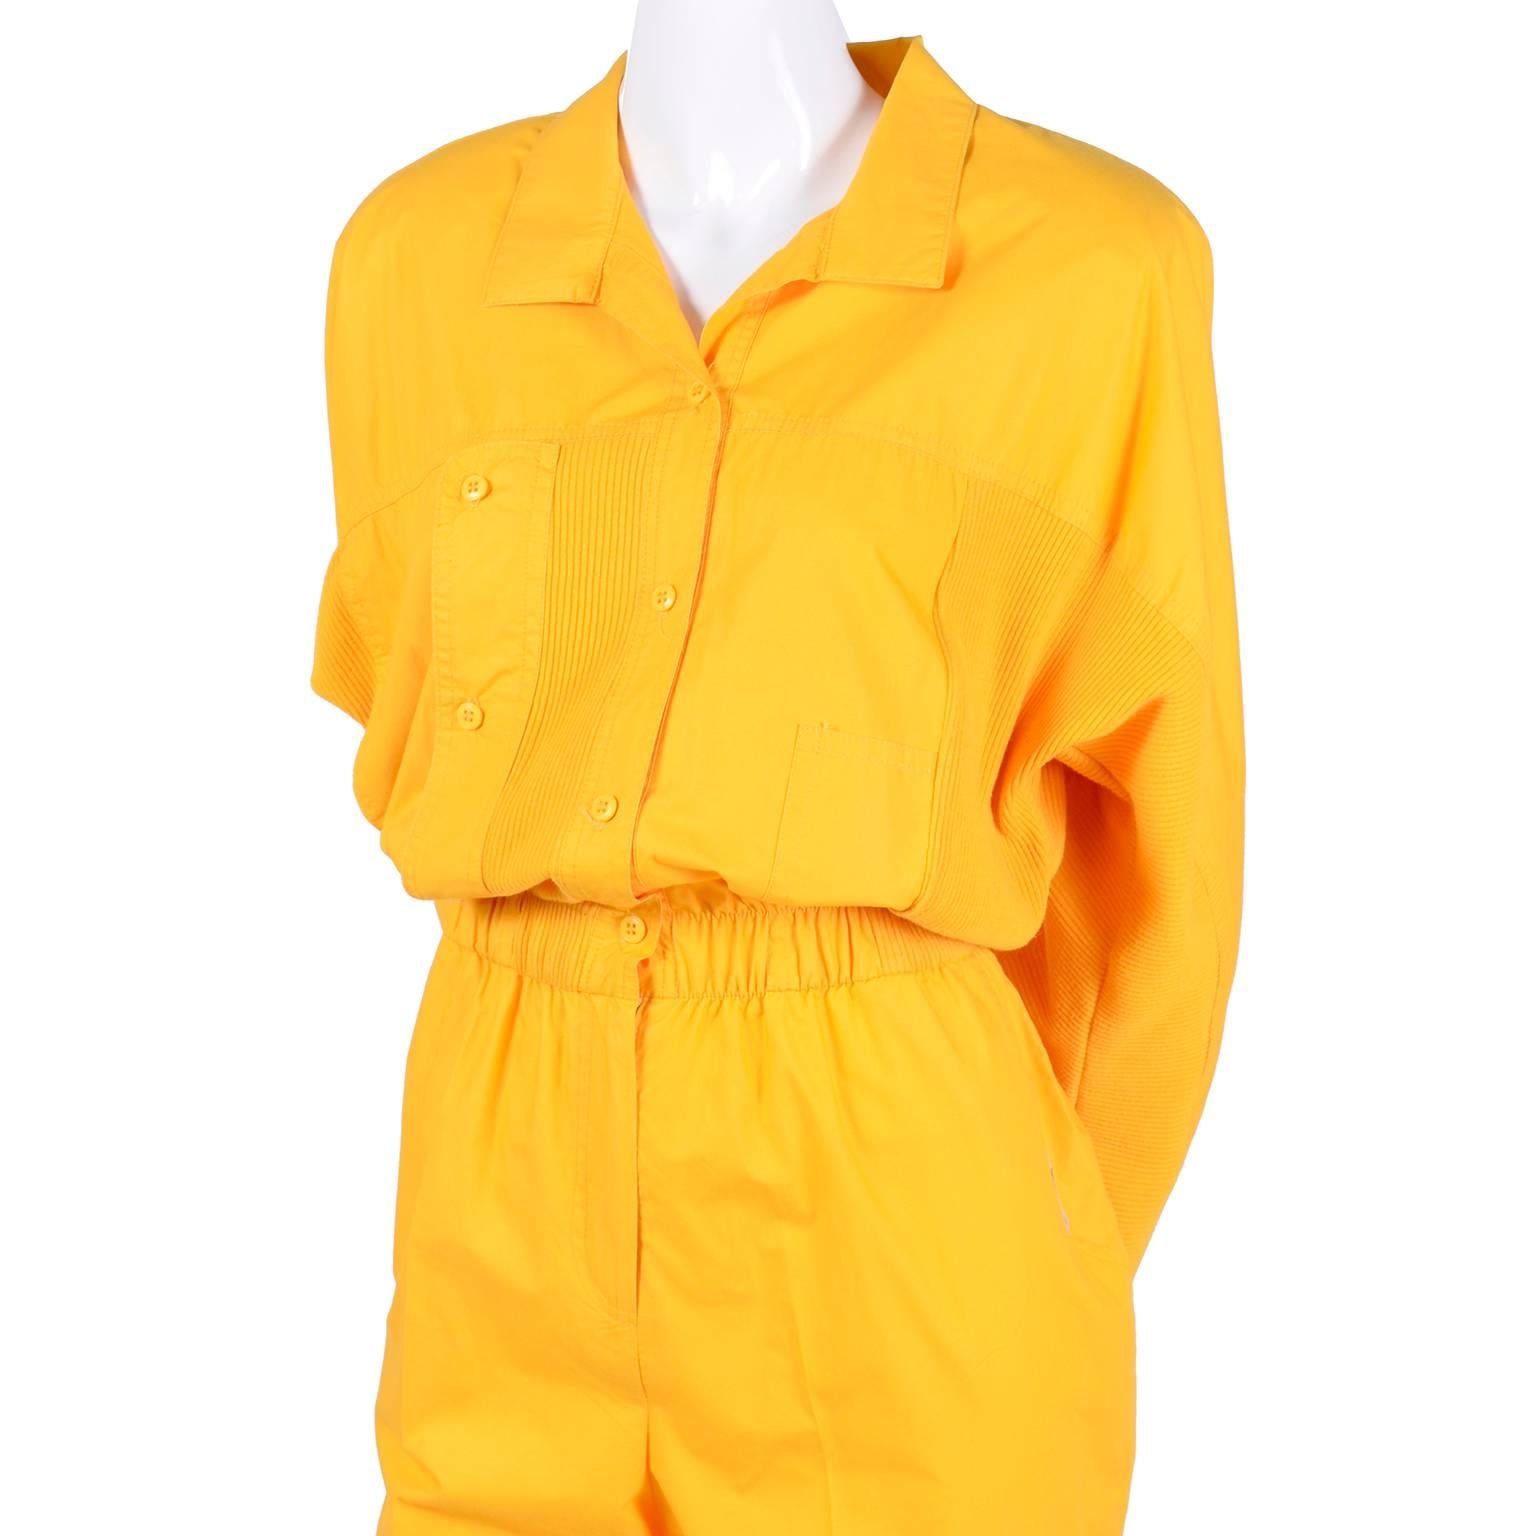 This vintage yellow jumpsuit is right on trend this year and was made by Saint Germain Paris in the 1980's.  We love vintage jumpsuits and this one is in amazing condition and has so much style. The jumpsuit is cotton with cotton knit ribbing on the